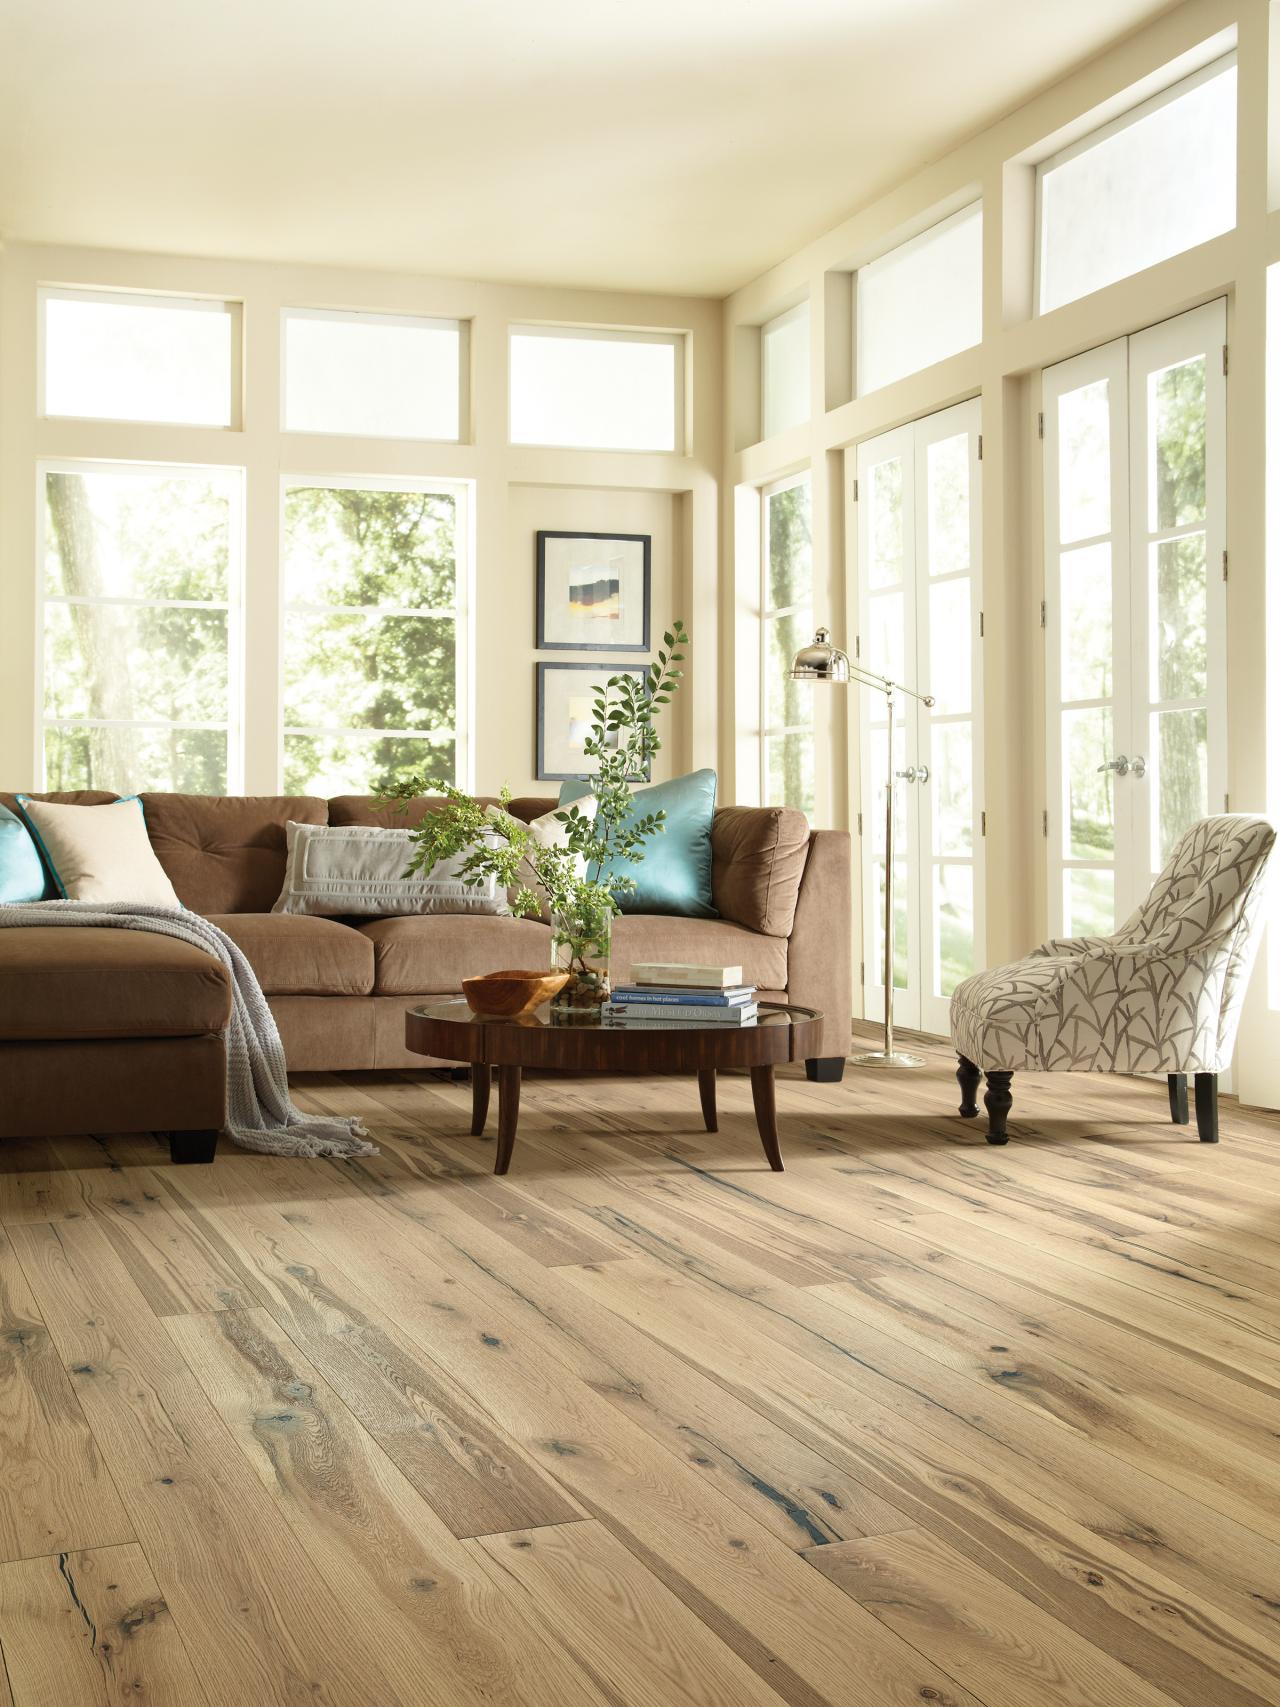 12 Forgiving Floors For Homes With Pets, Engineered Hardwood Floors And Dogs